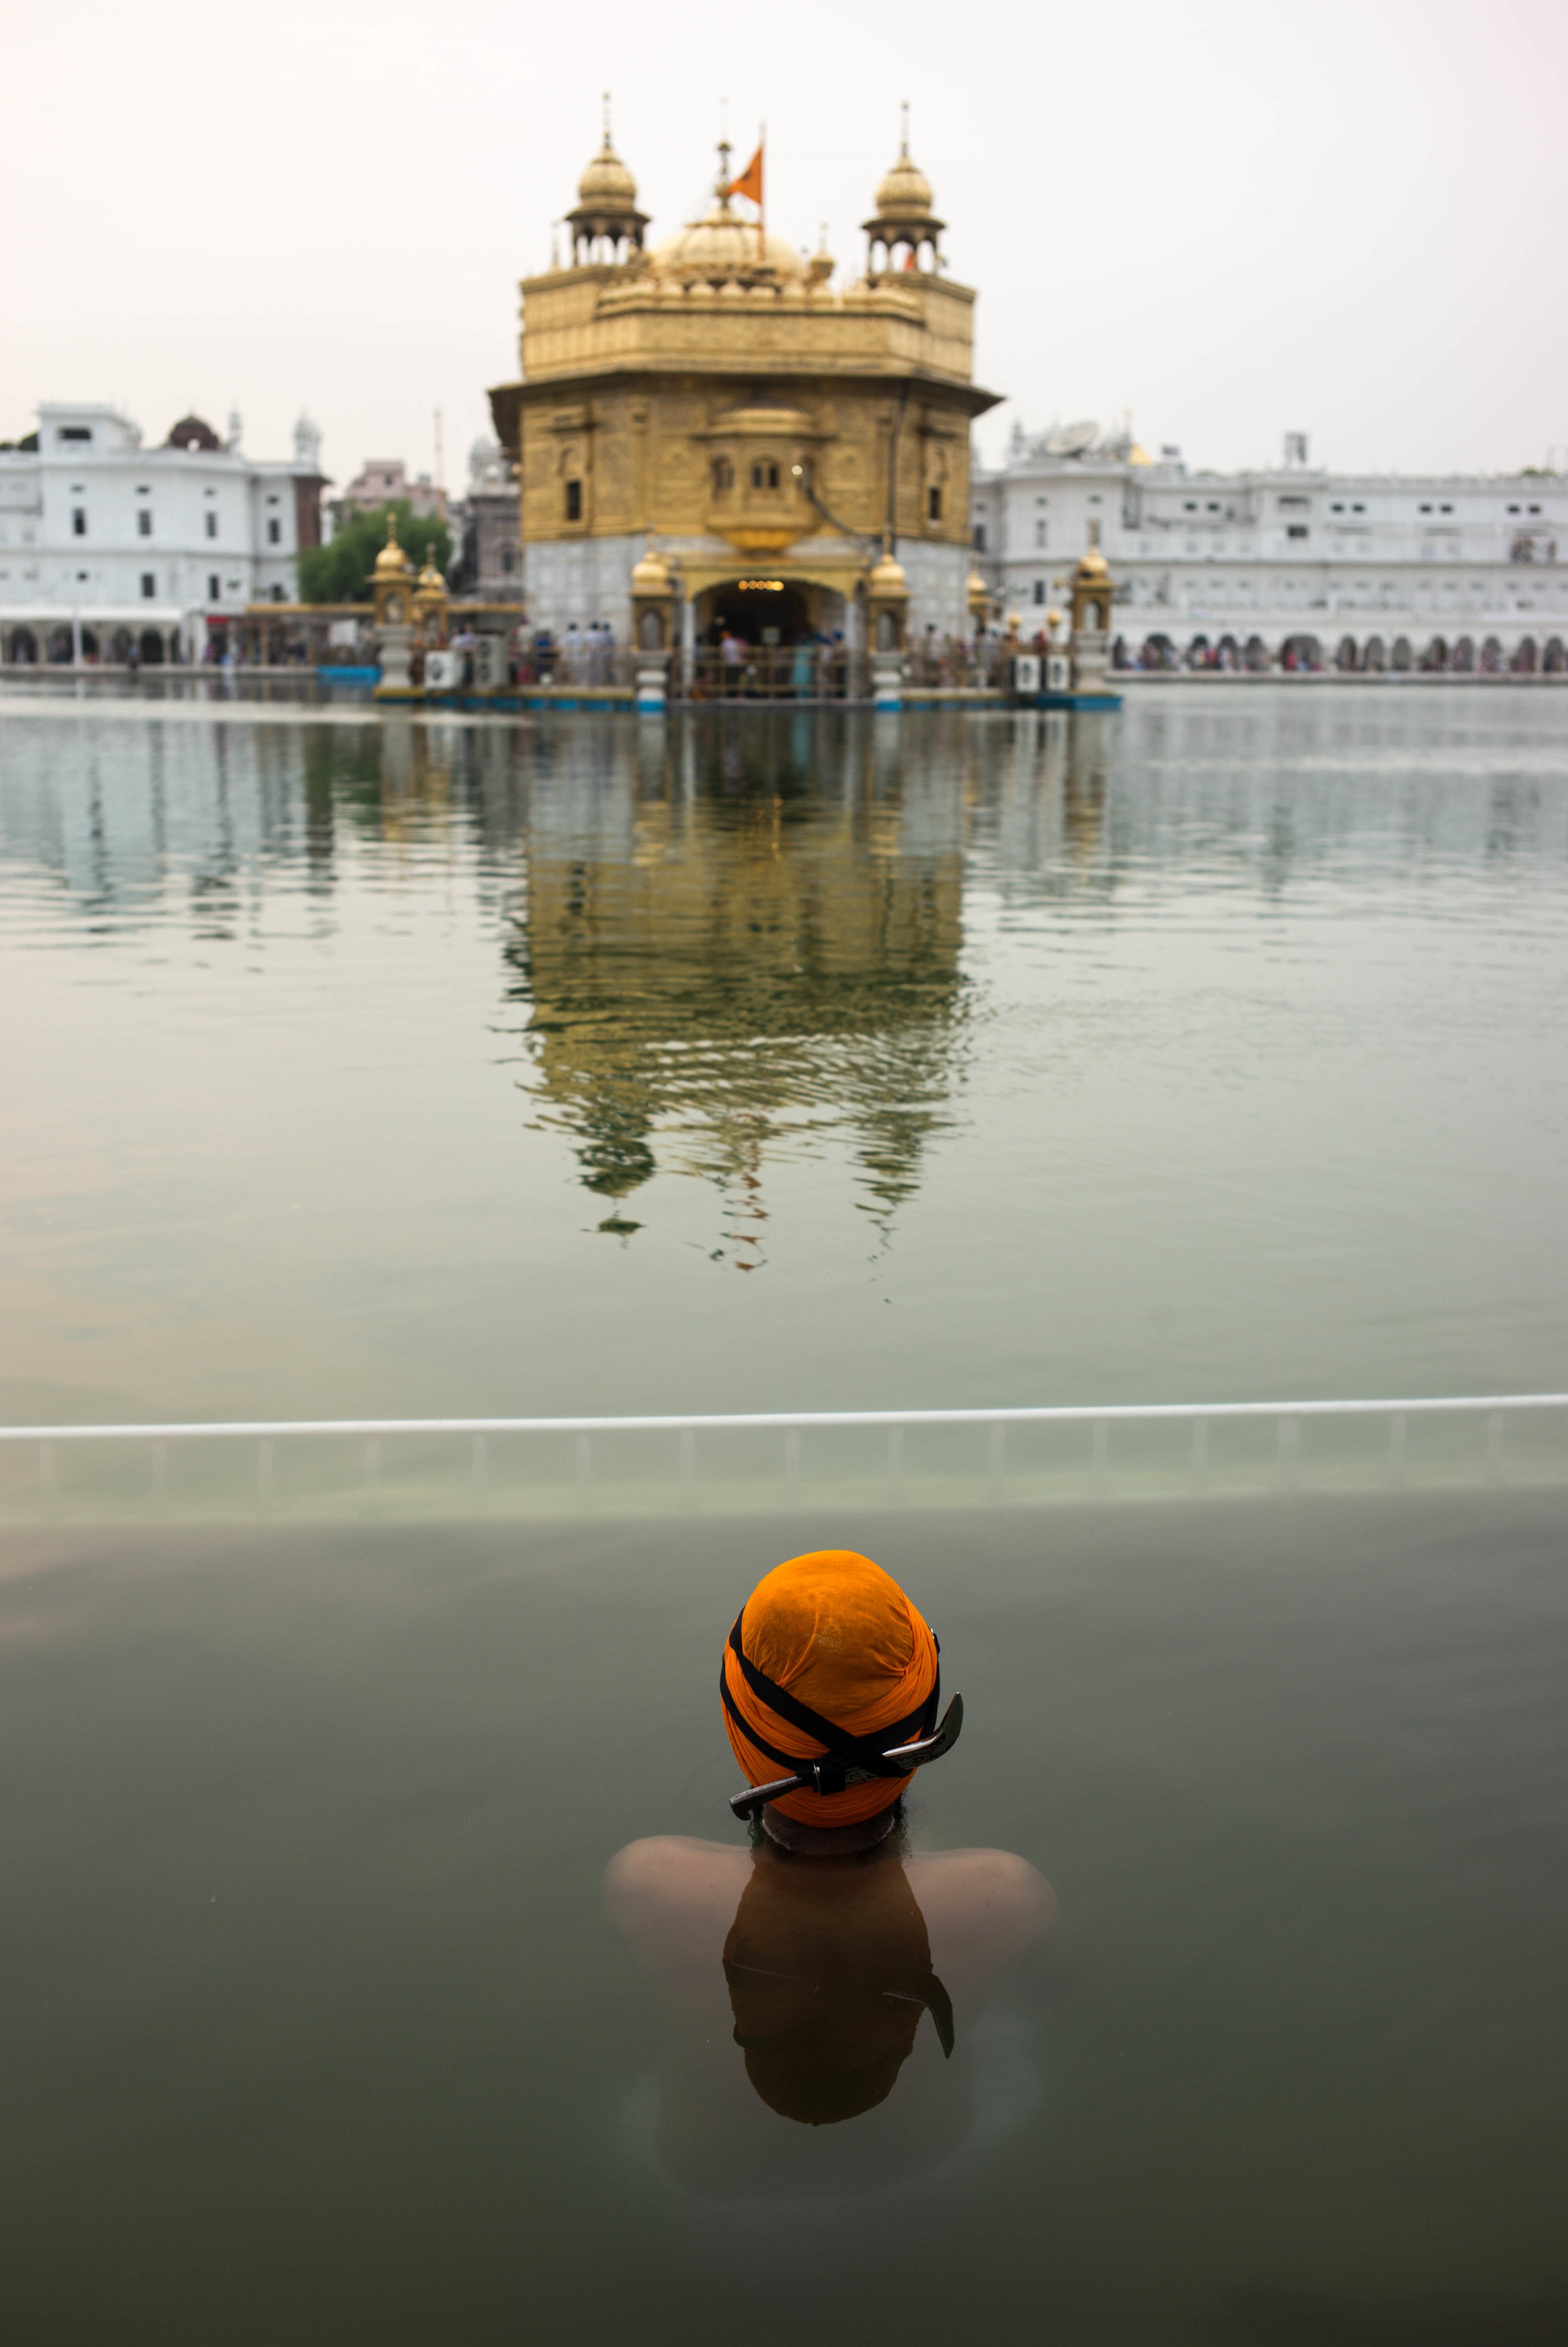 The Sikhs, Pilgrims of the Golden Temple